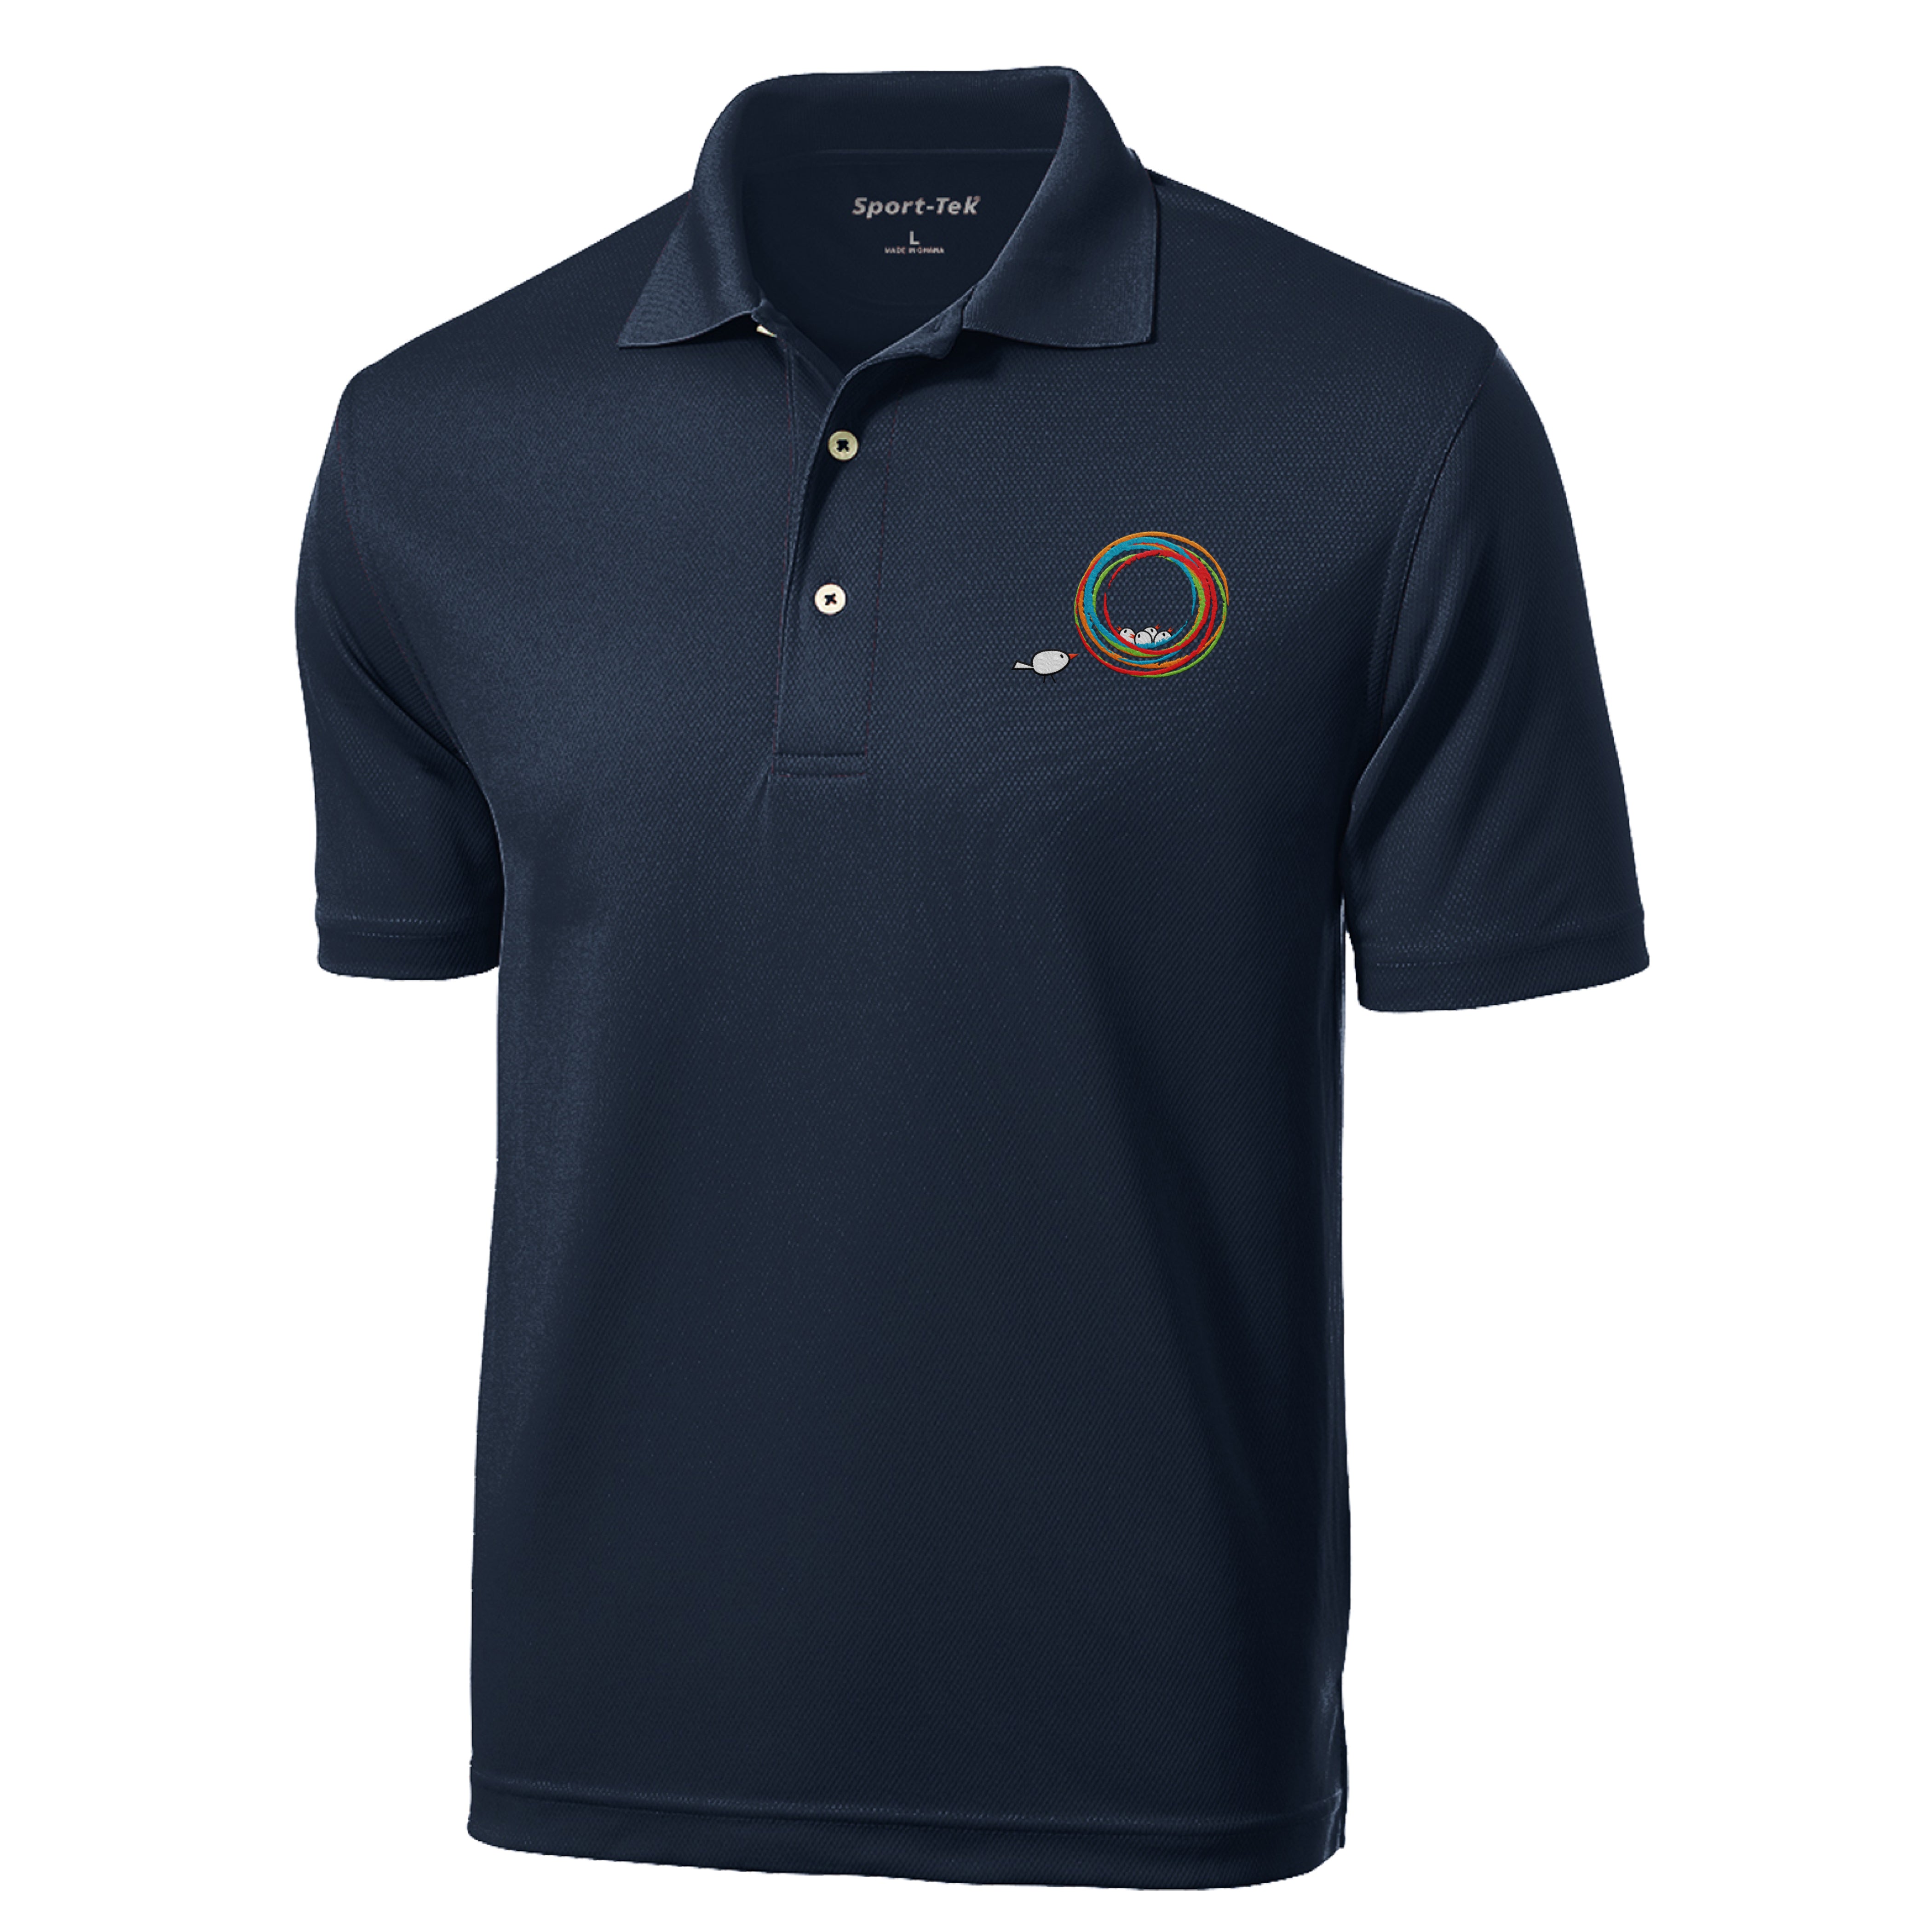 The Learning Nest - Men's Performance Polo